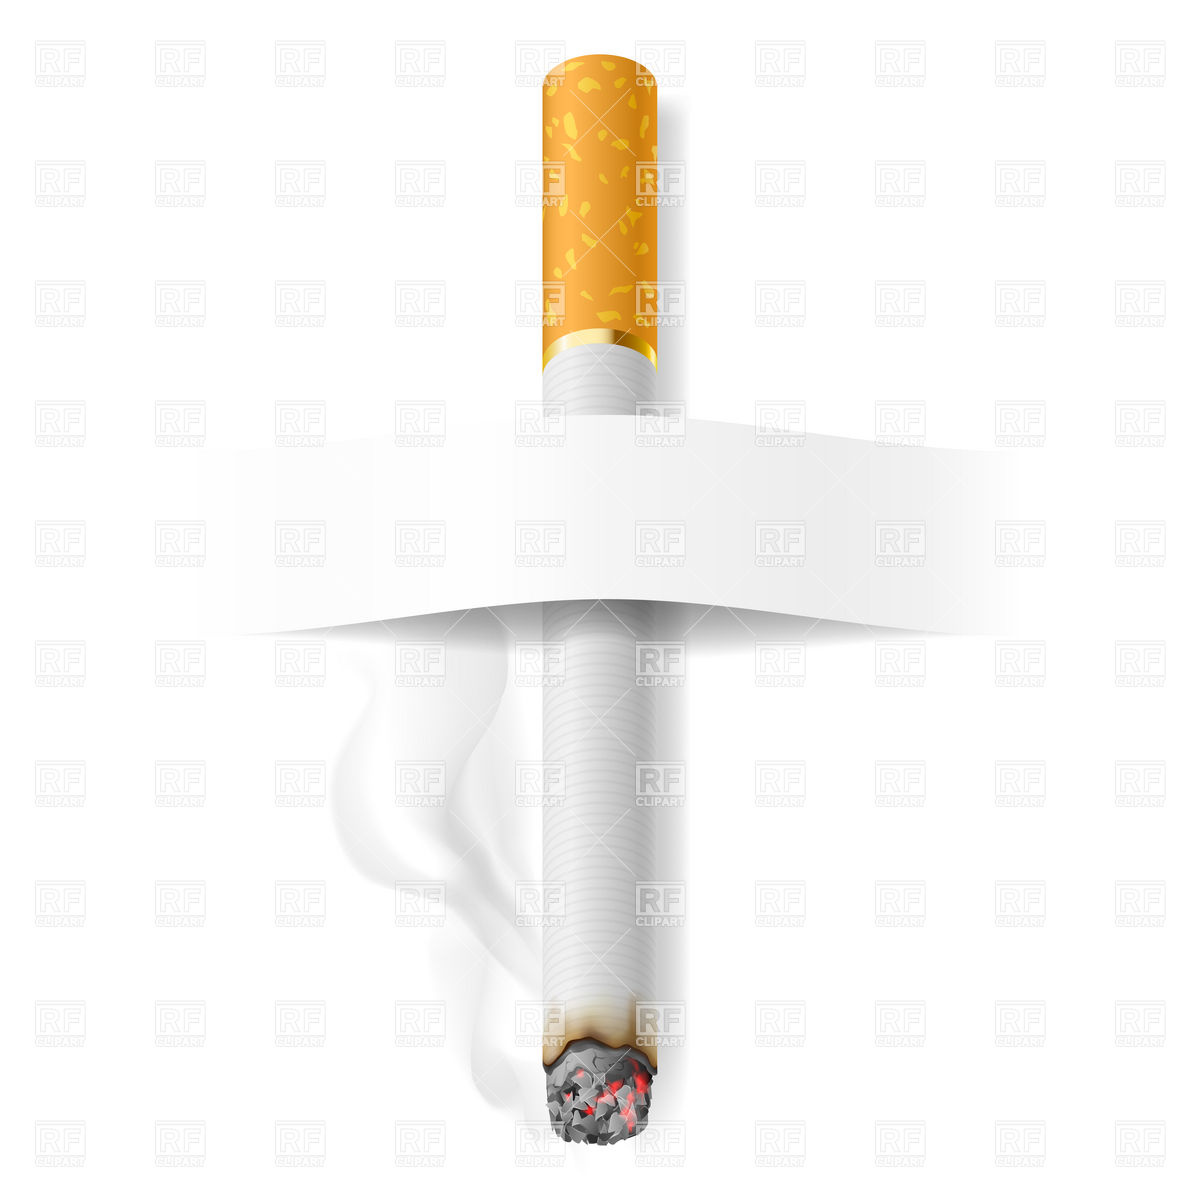 Realistic Cigarette With Smoke Objects Download Royalty Free Vector    